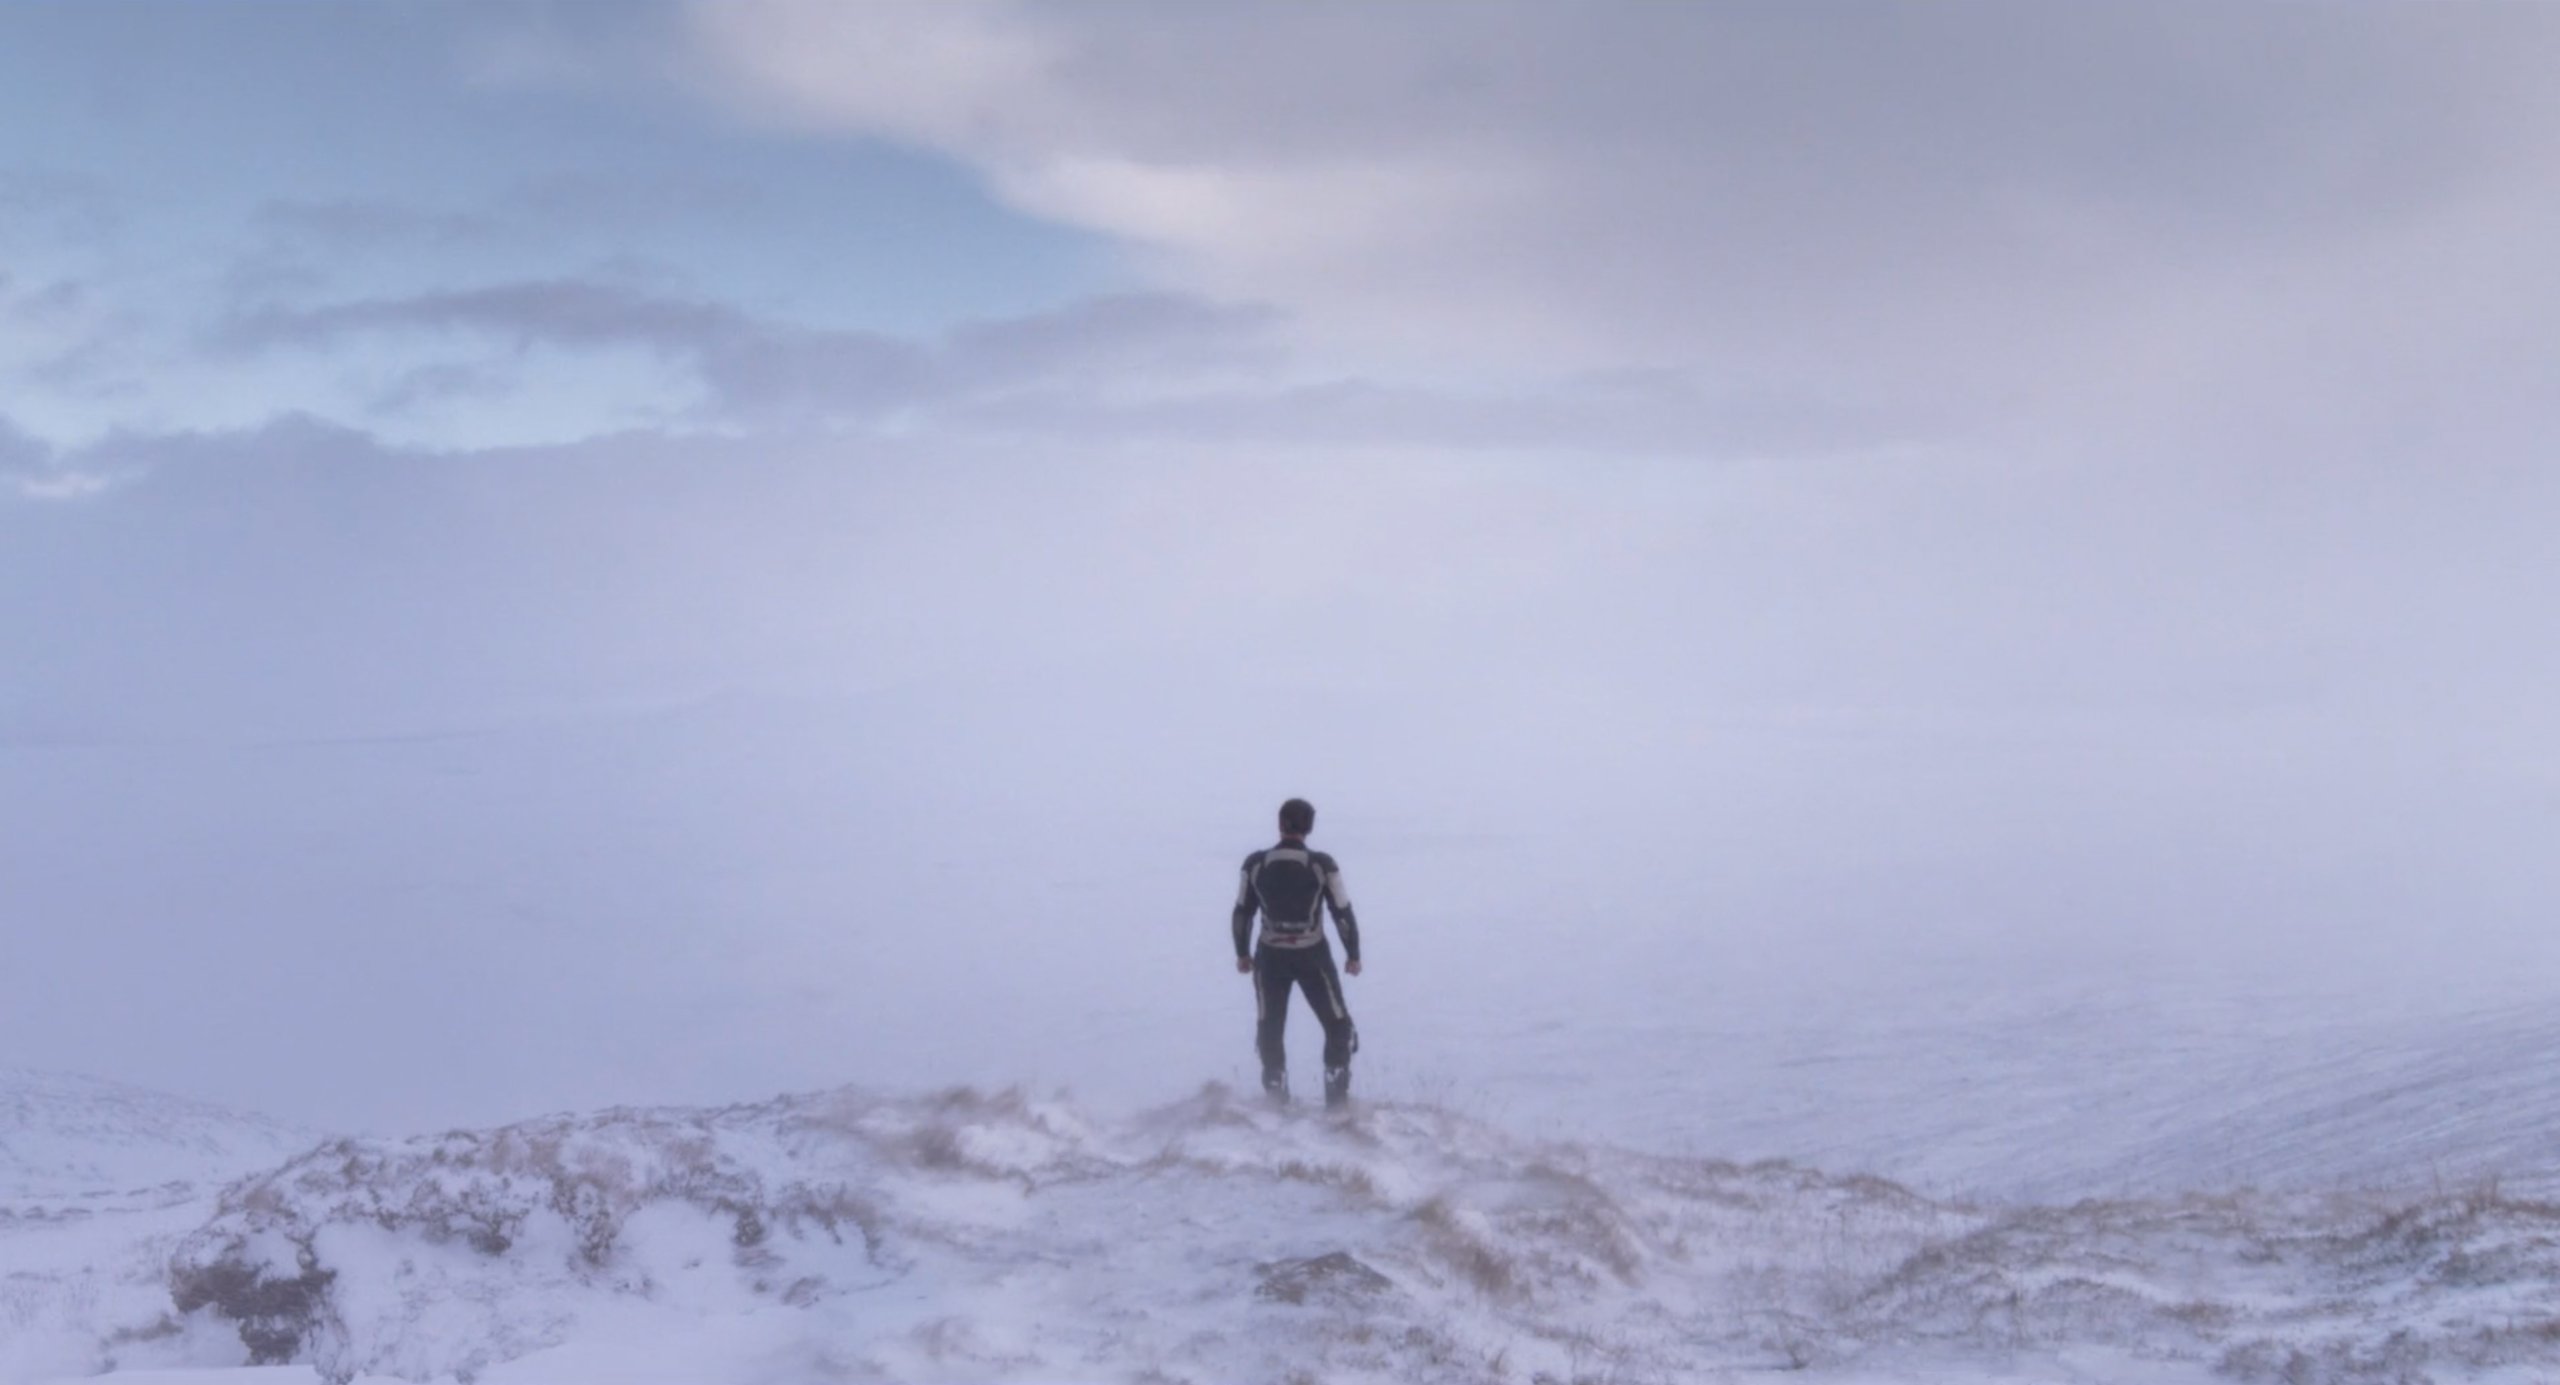 The Motorcycle Man looks over a snowy landscape while searching for The Woman in Under the Skin